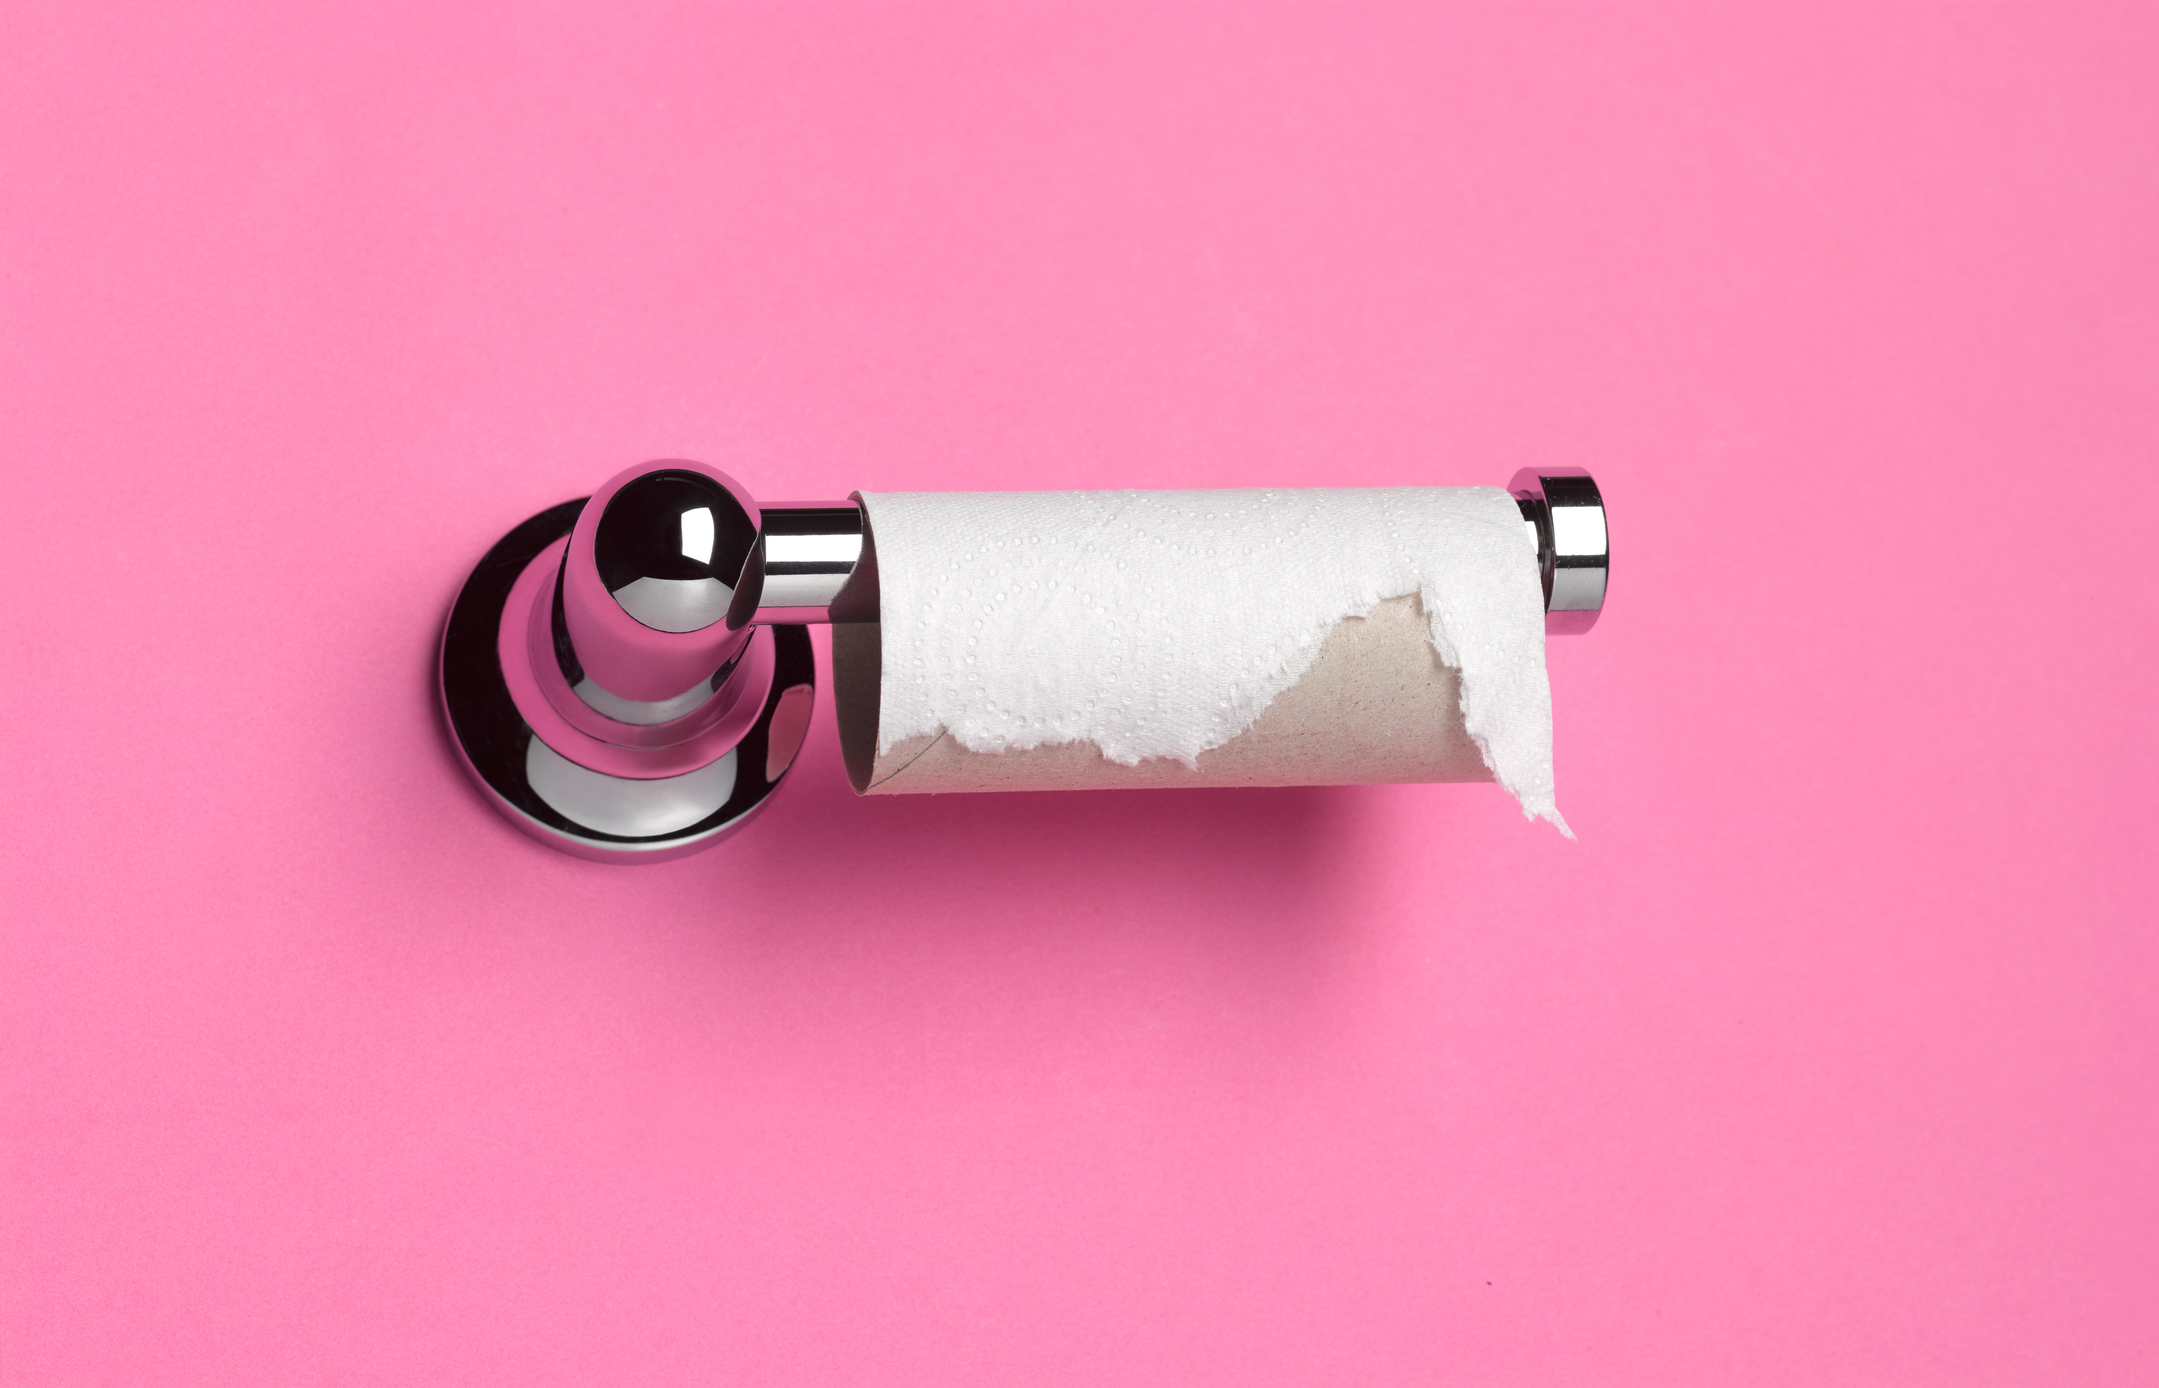 Toilet paper roll nearly empty on a metal holder, against a pink background